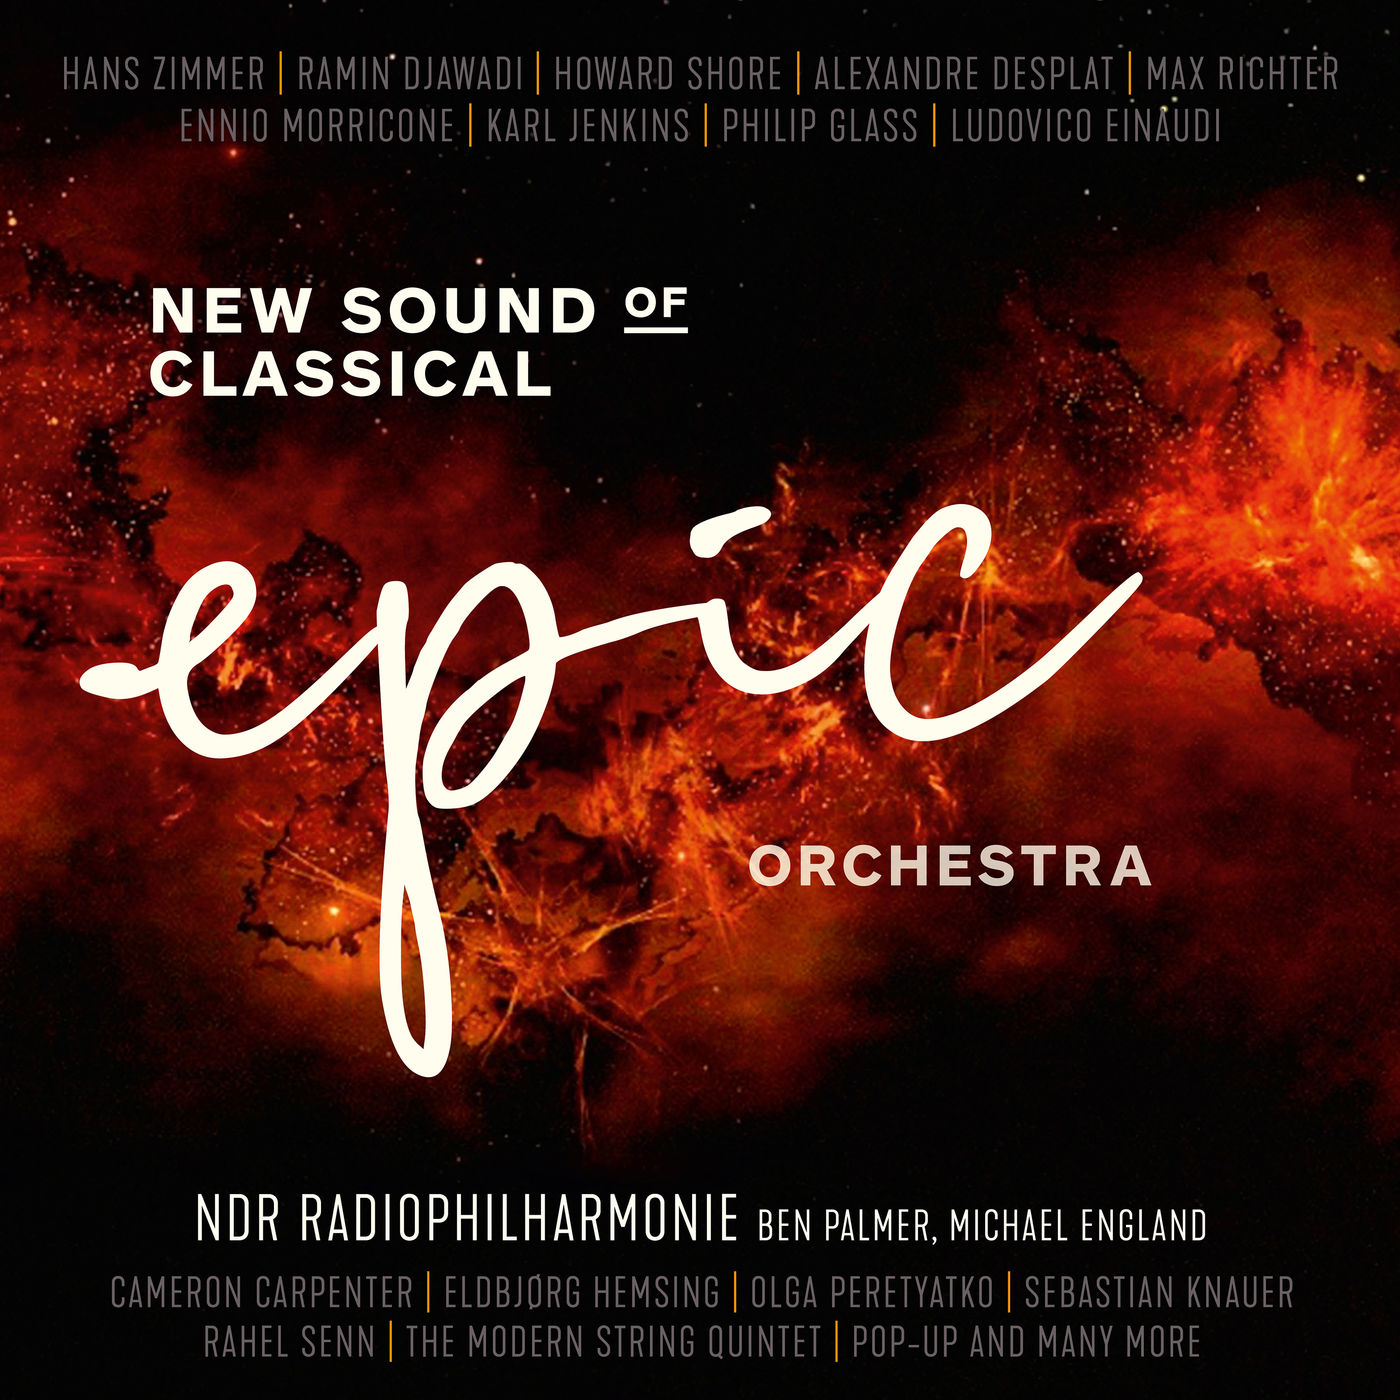 NDR Radiophilharmonie – Epic Orchestra – New Sound of Classical (2020) [FLAC 24bit/48kHz]